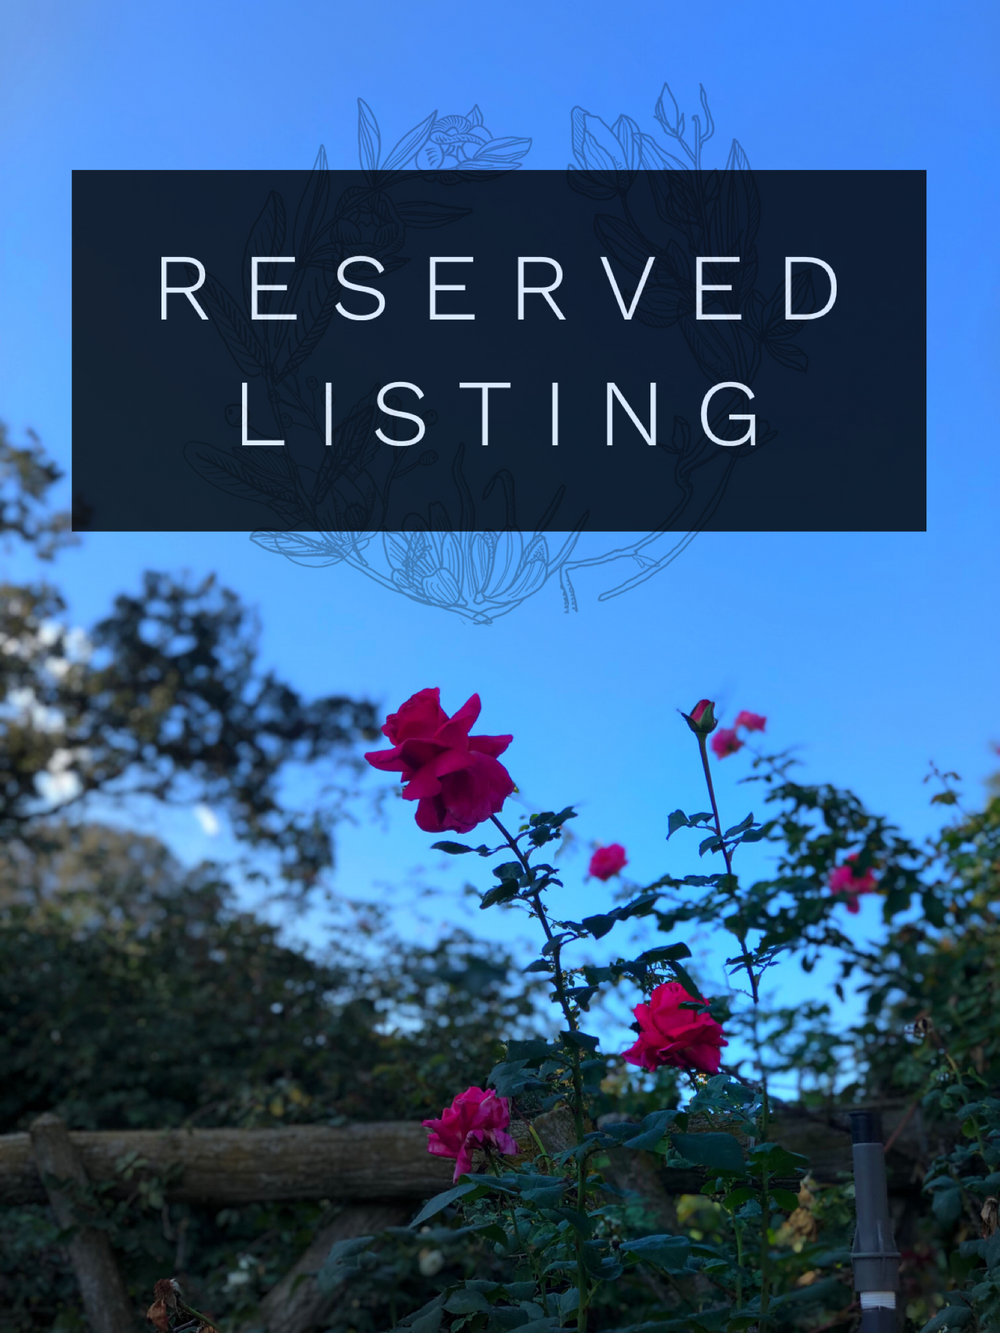 RESERVED LISTING - chexicanlew